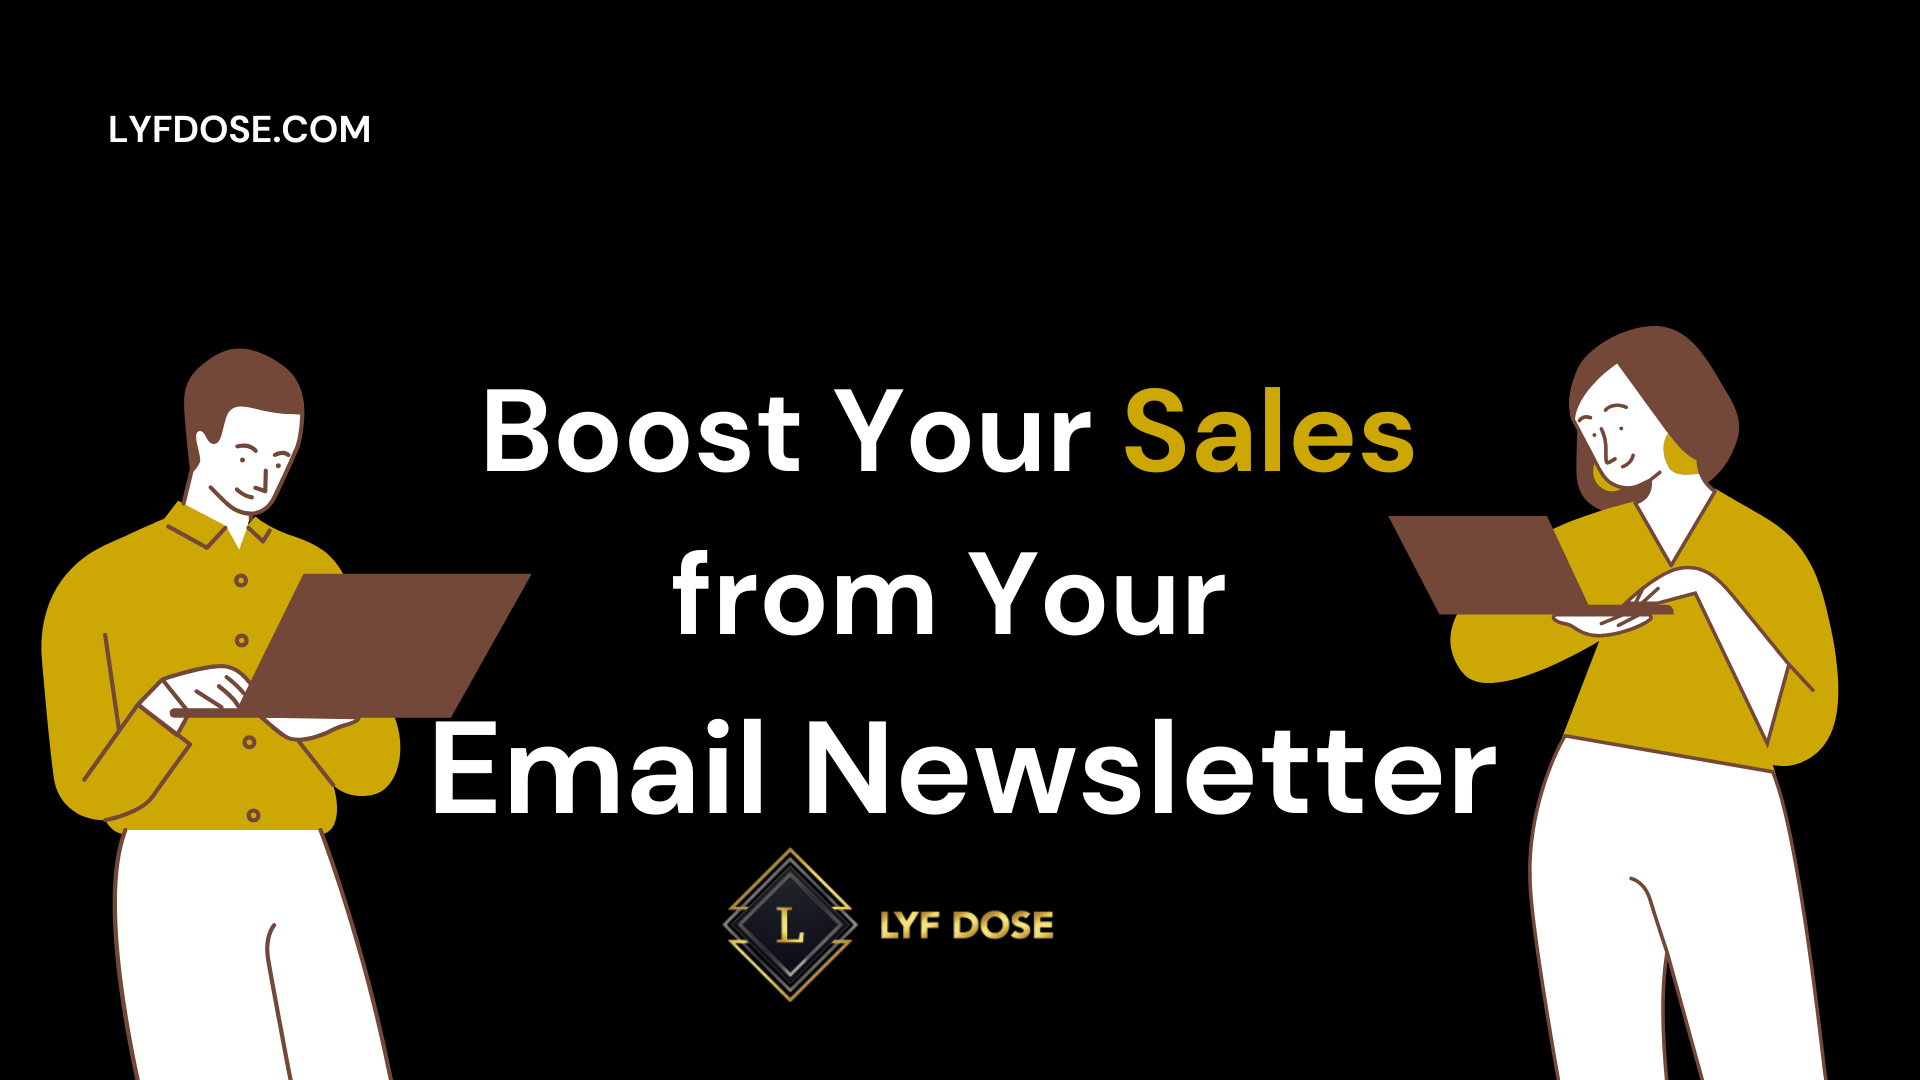 Boost Your Sales from Your Email Newsletter